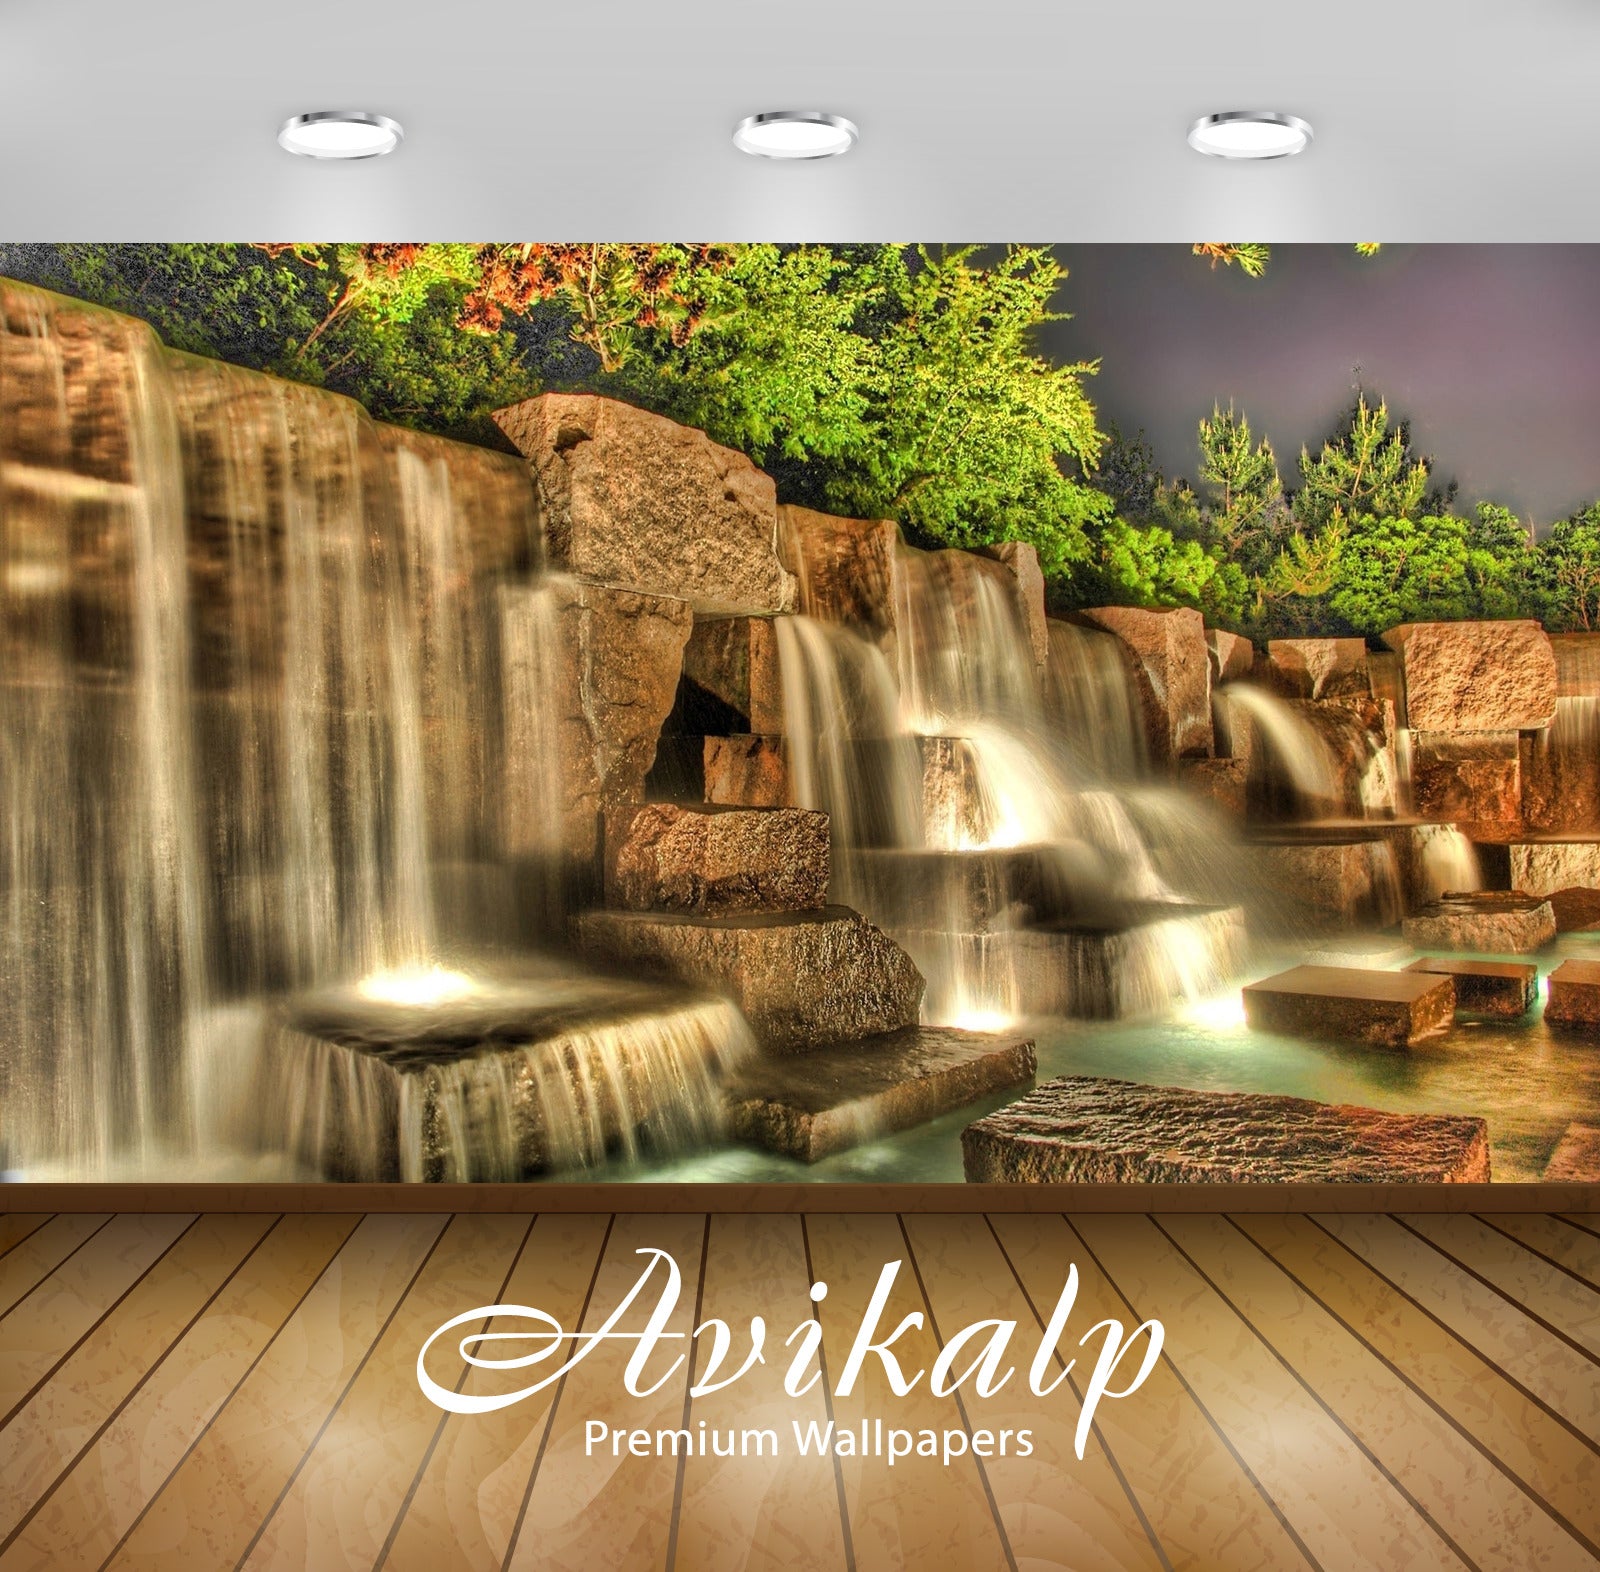 Avikalp Exclusive Awi5107 Artificial Waterfall In A Garden Nature Full HD Wallpapers for Living room